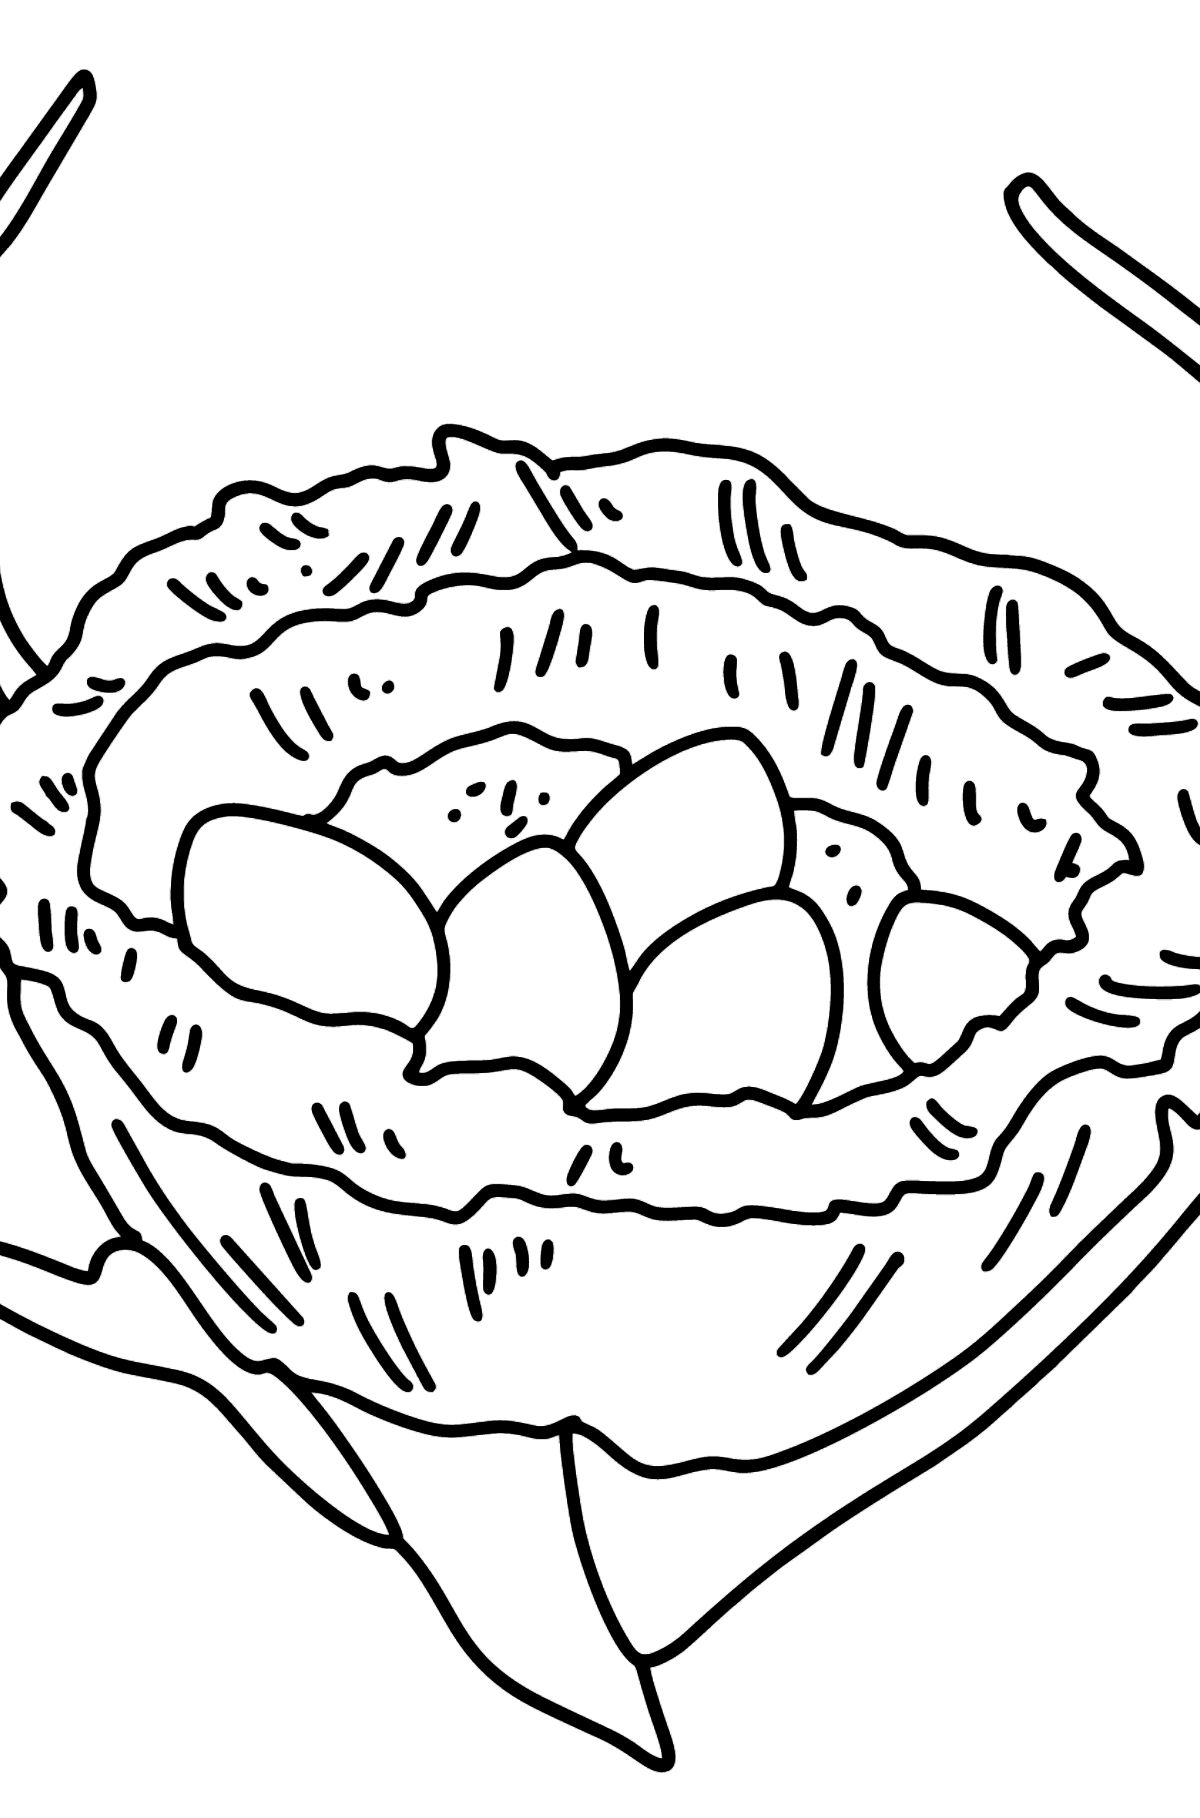 Bird's Nest coloring page - Coloring Pages for Kids